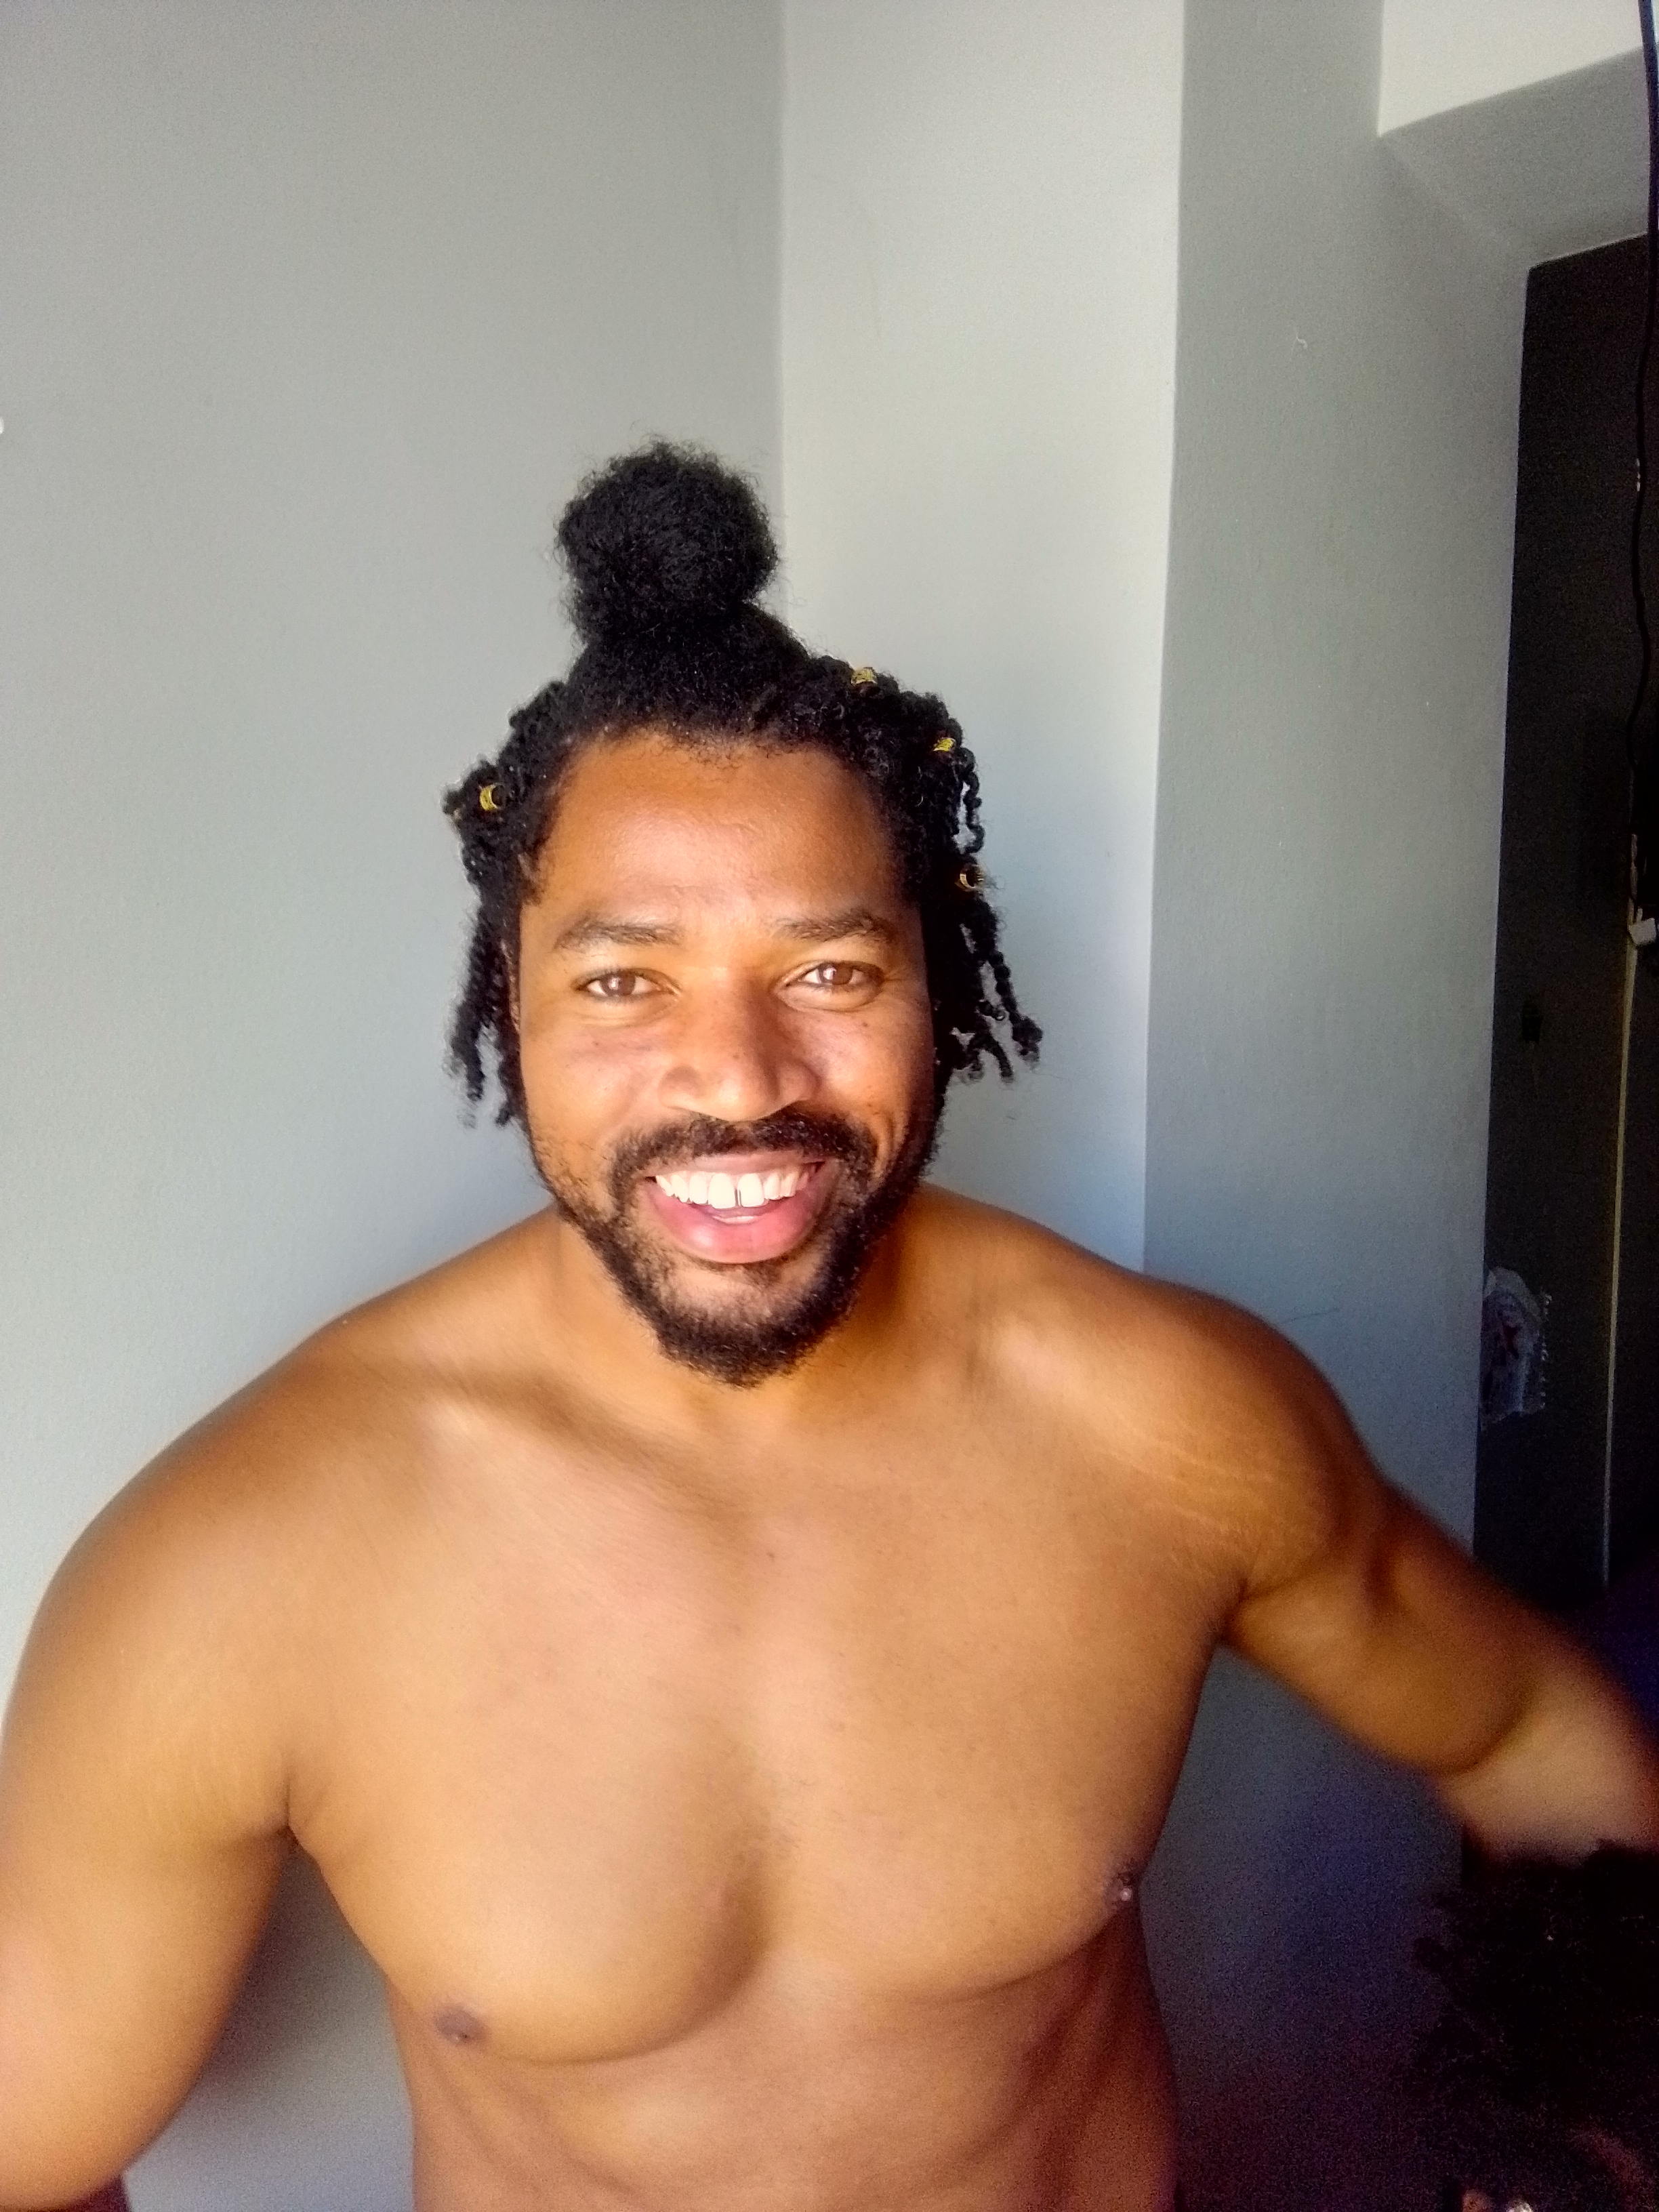 father counsel. Kimroy Bailey. Trott Bailey Family. World's most muscular naturally healthy man Kimroy Bailey Big King KB amazing photo with his natural long hair braided in an amazing style and tucked back with golden hair accessories.